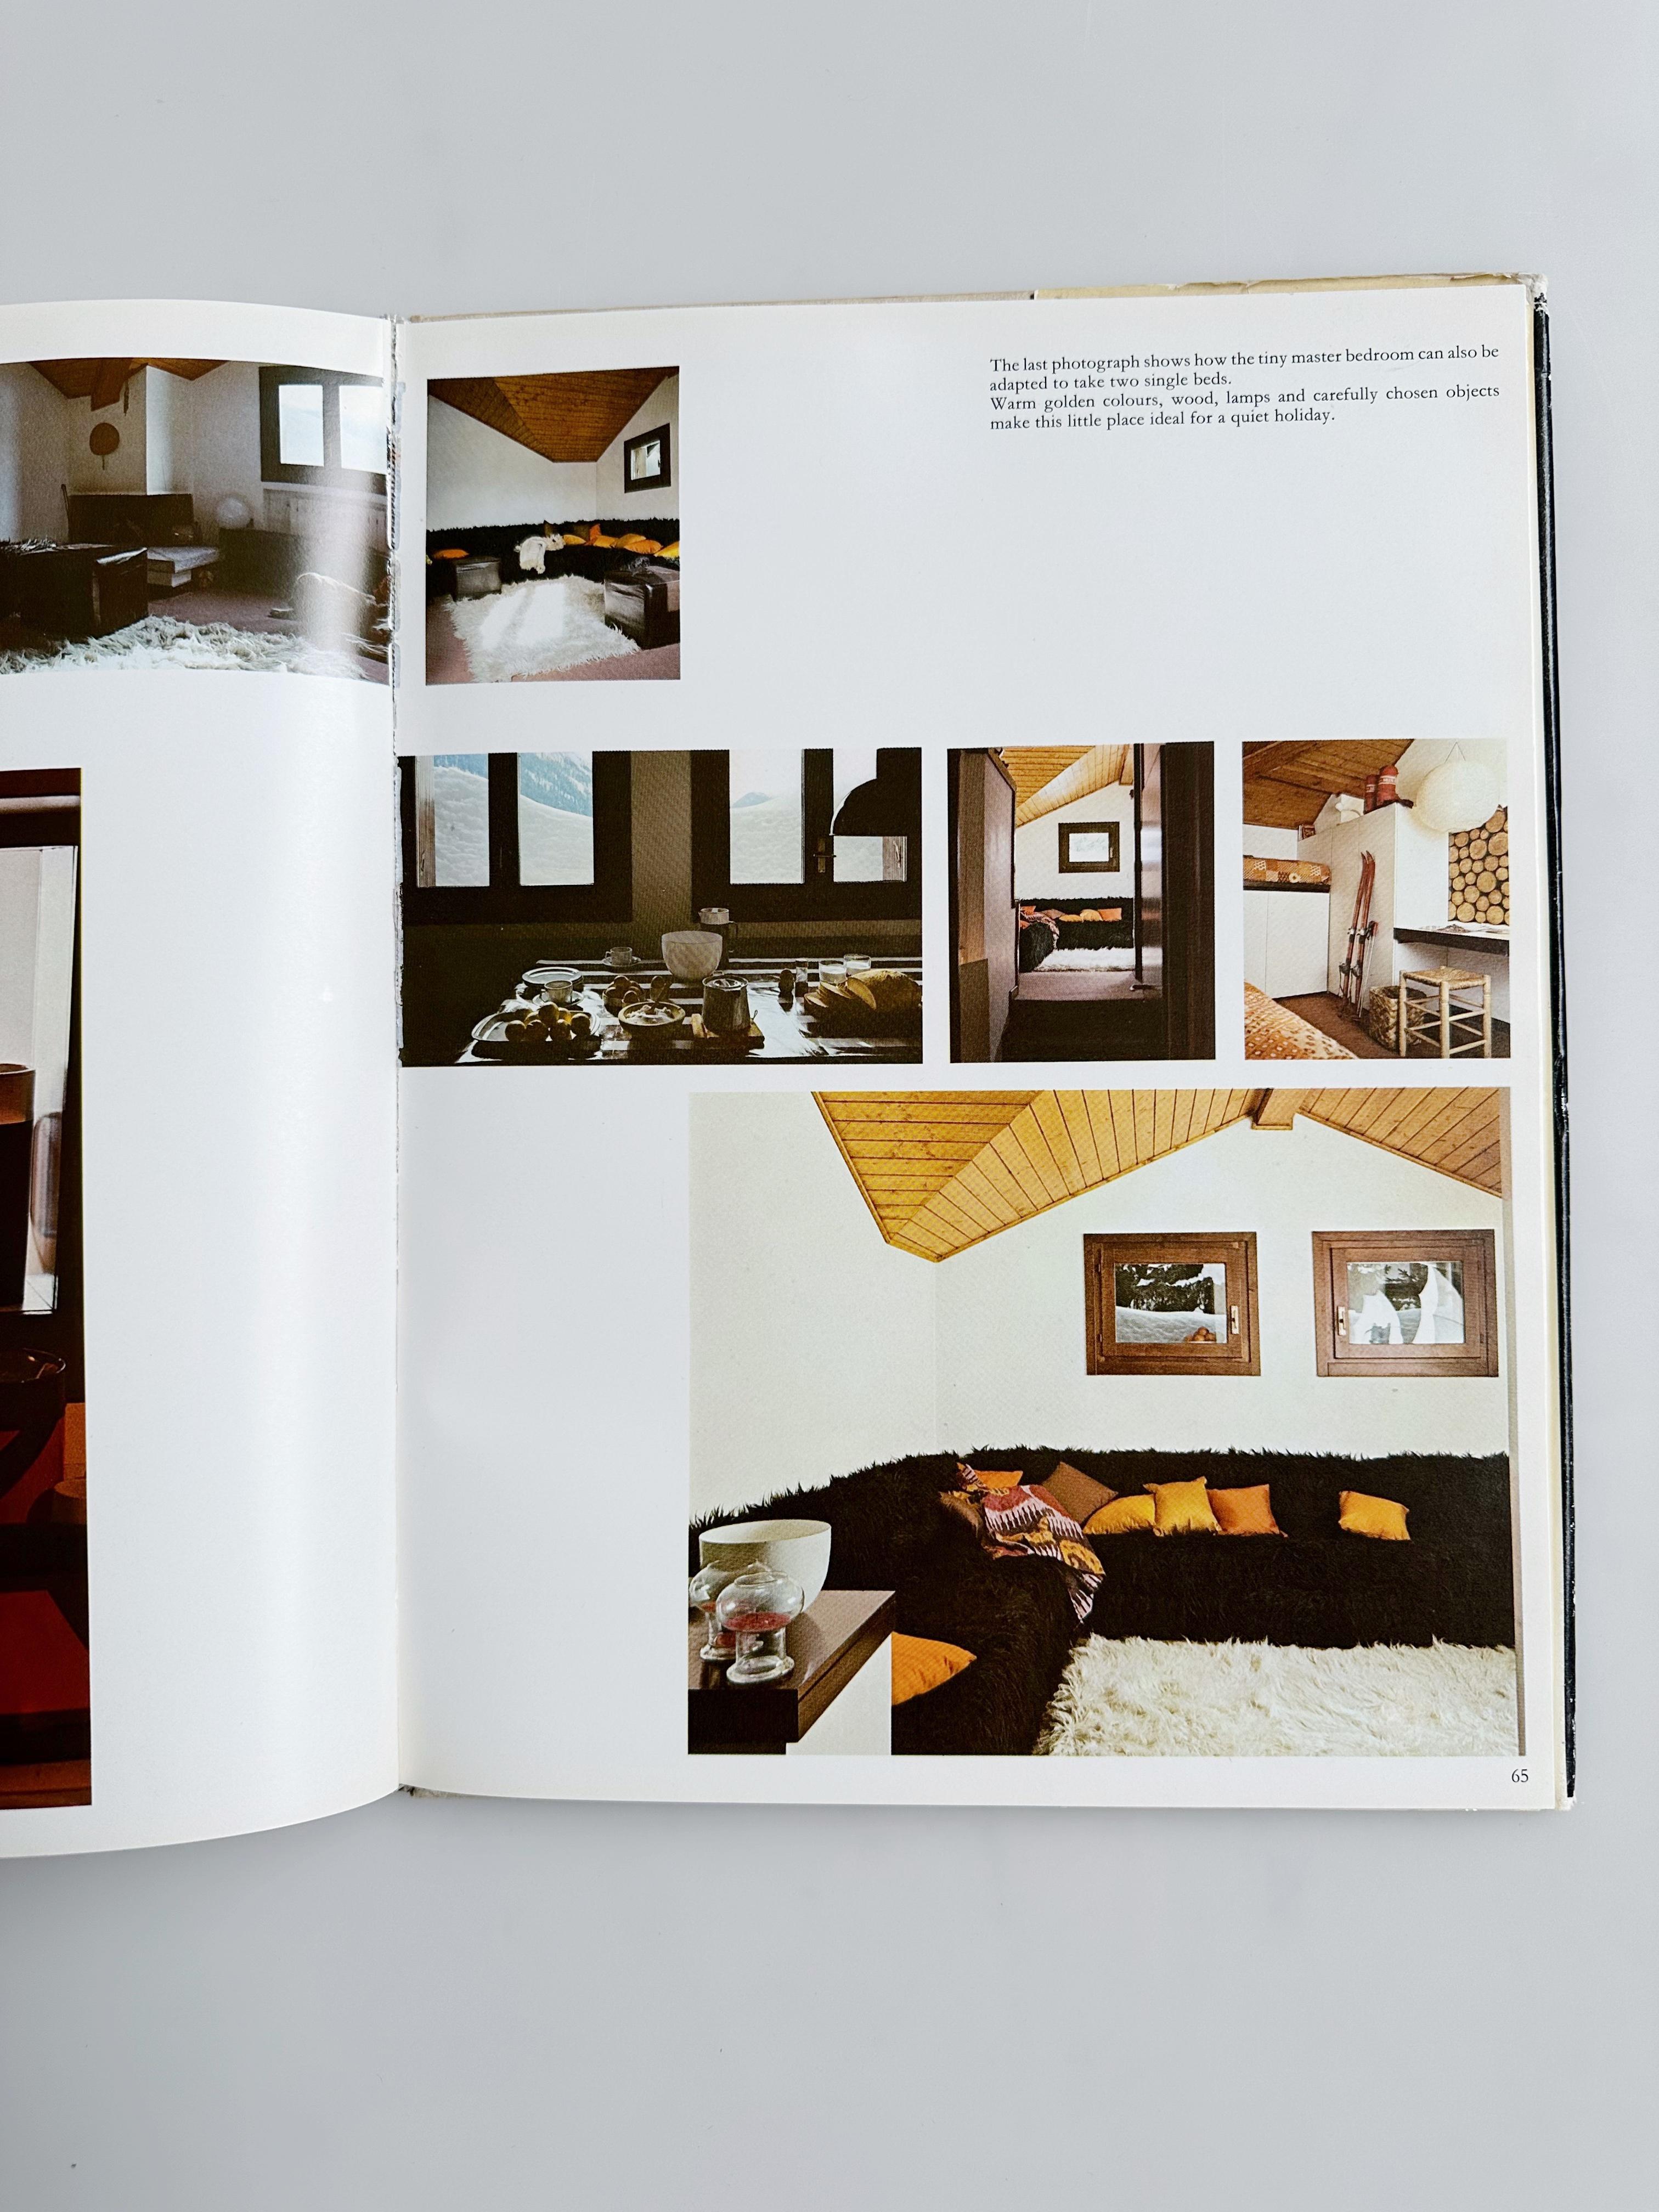 Paper One Room Interiors: 34 Designs From Around The World, 1979